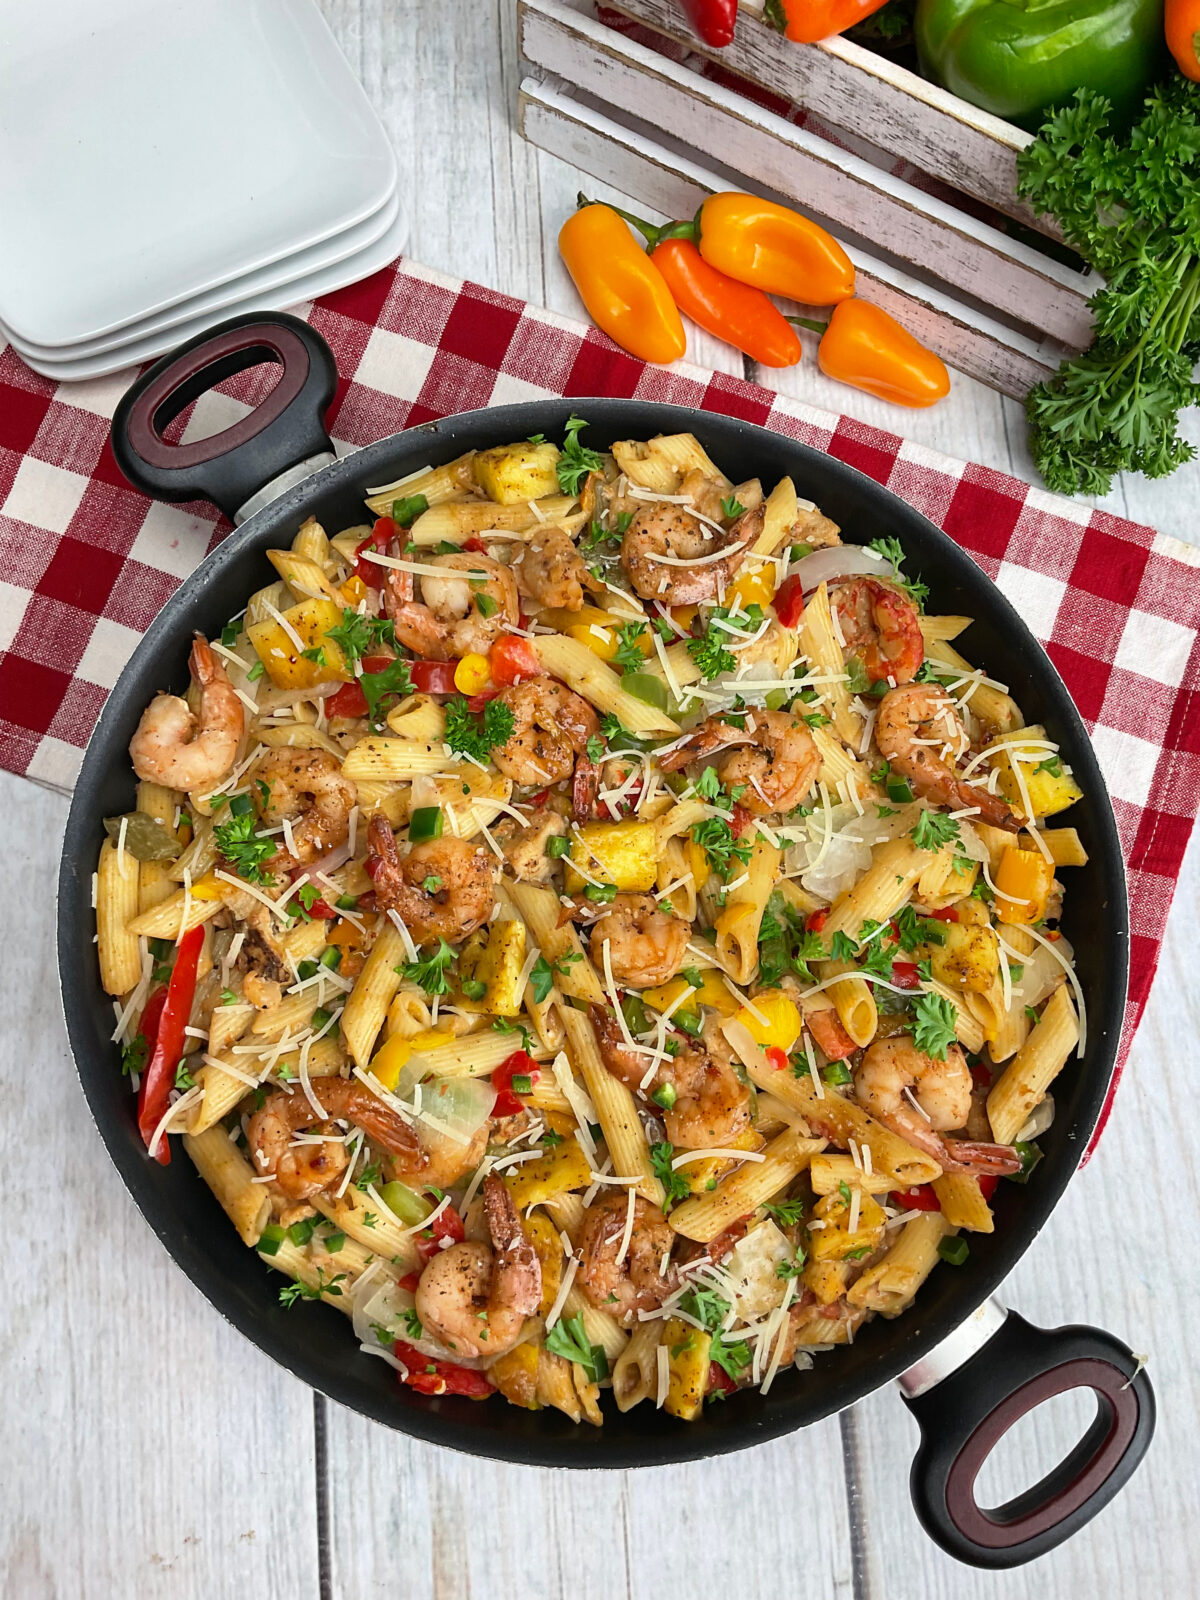 This jerk shrimp pasta recipe is packed with flavor, easy to make, and perfect for any night of the week. Get cooking tonight!